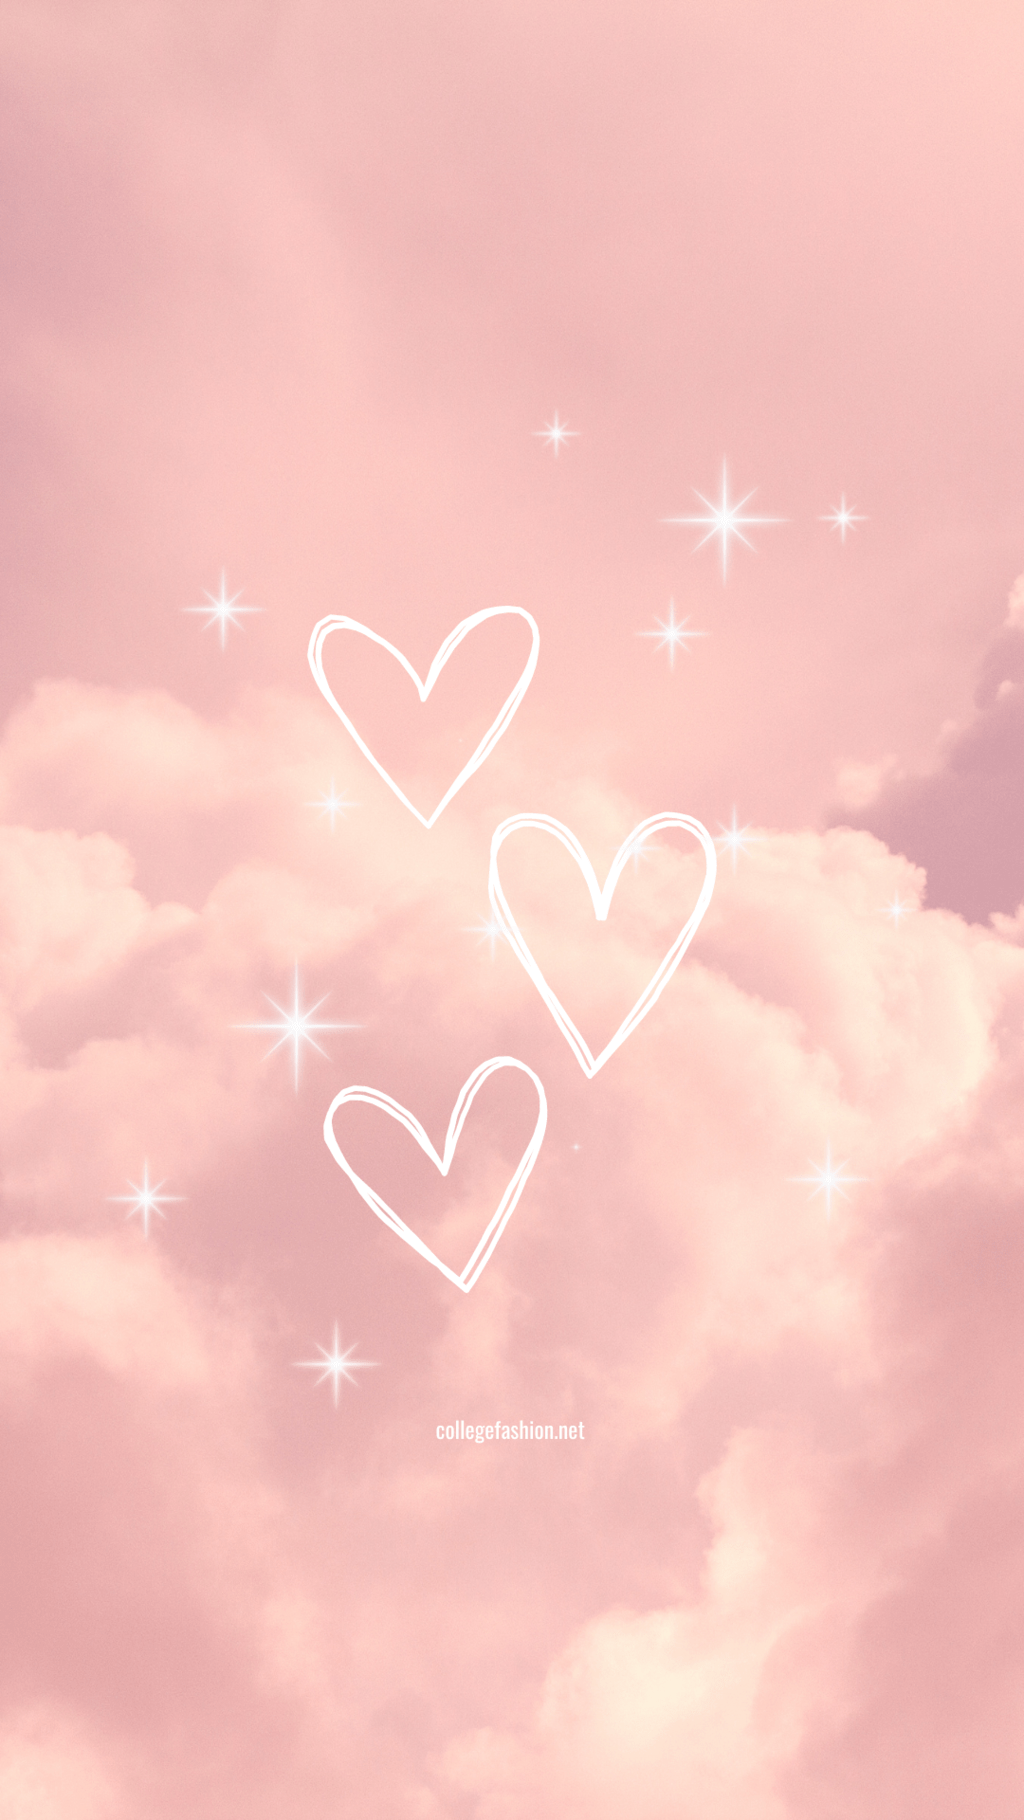 A pink sky with hearts and stars - Pink heart